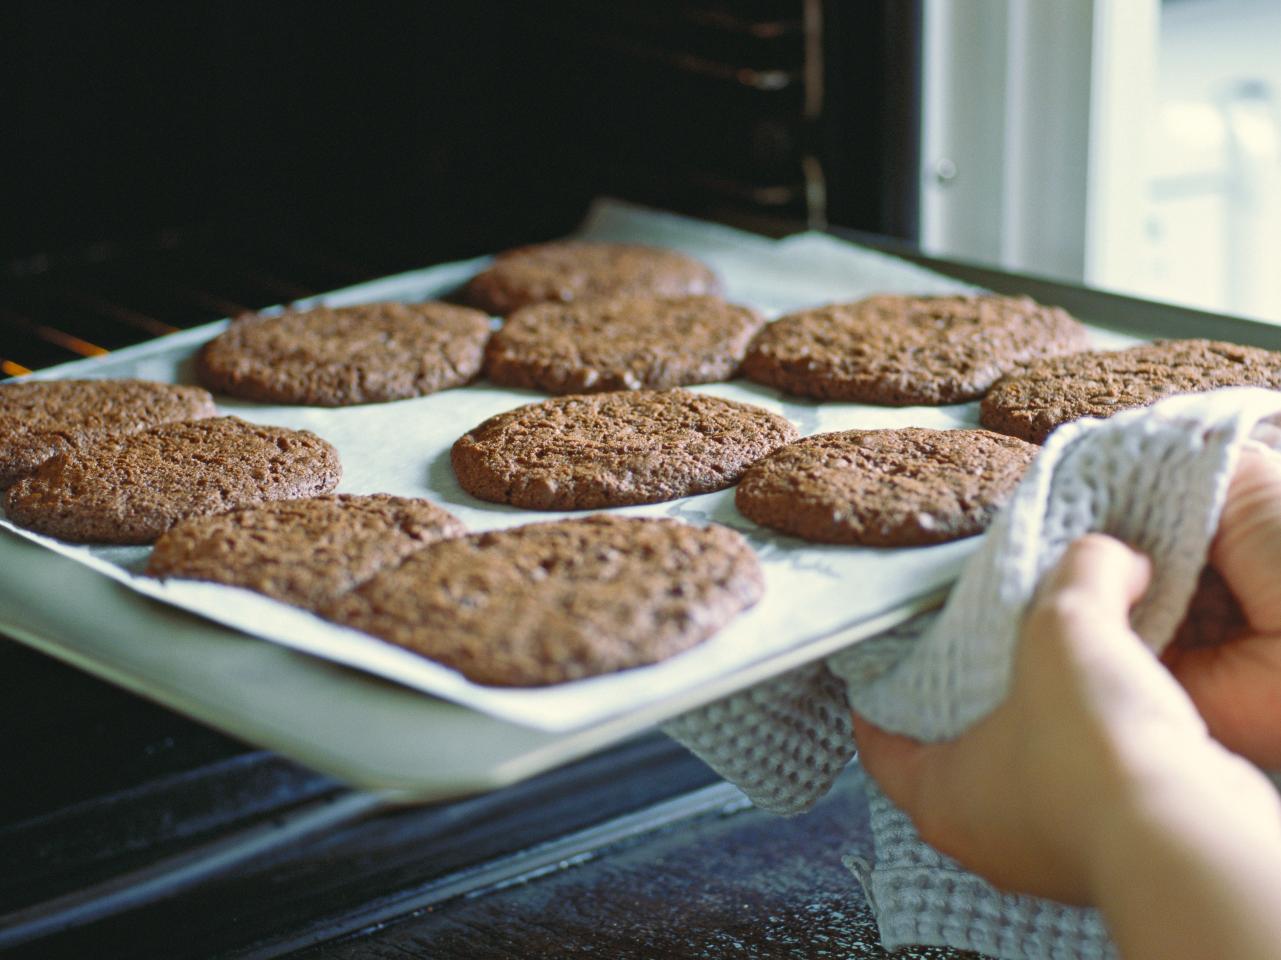 How to Keep Cookies on a Baking Sheet from Sticking